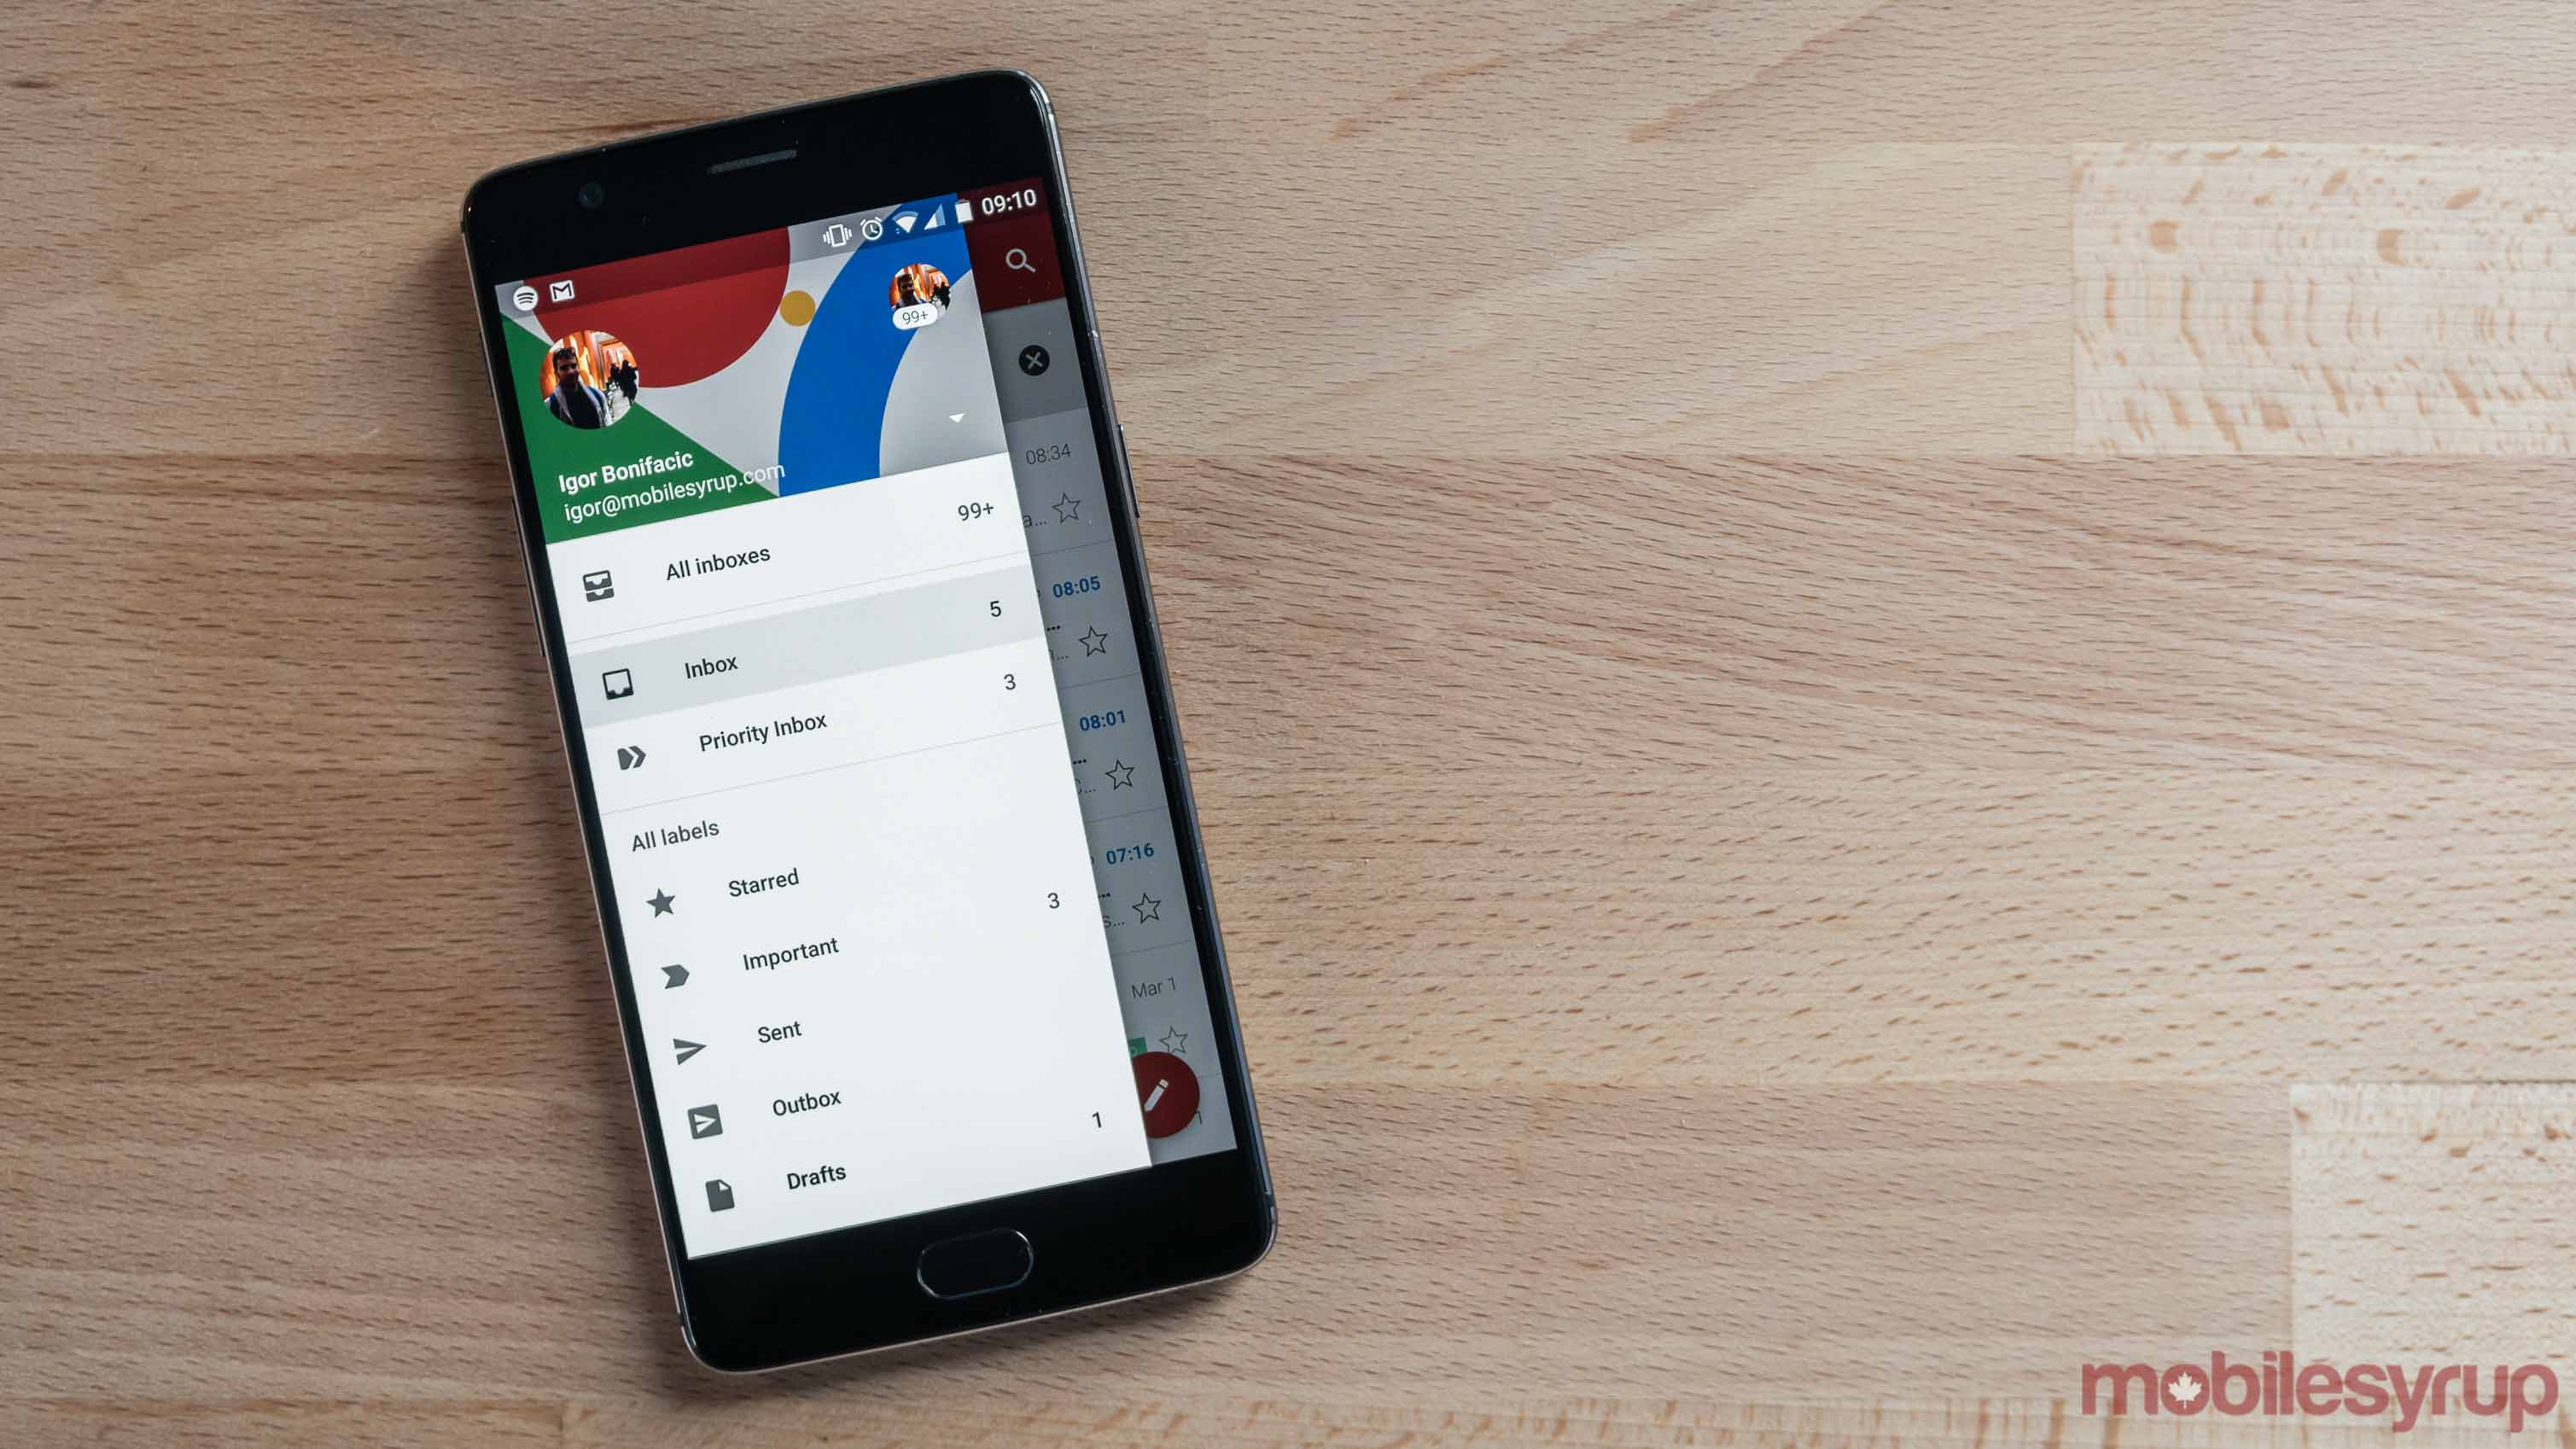 Gmail app on Android phone